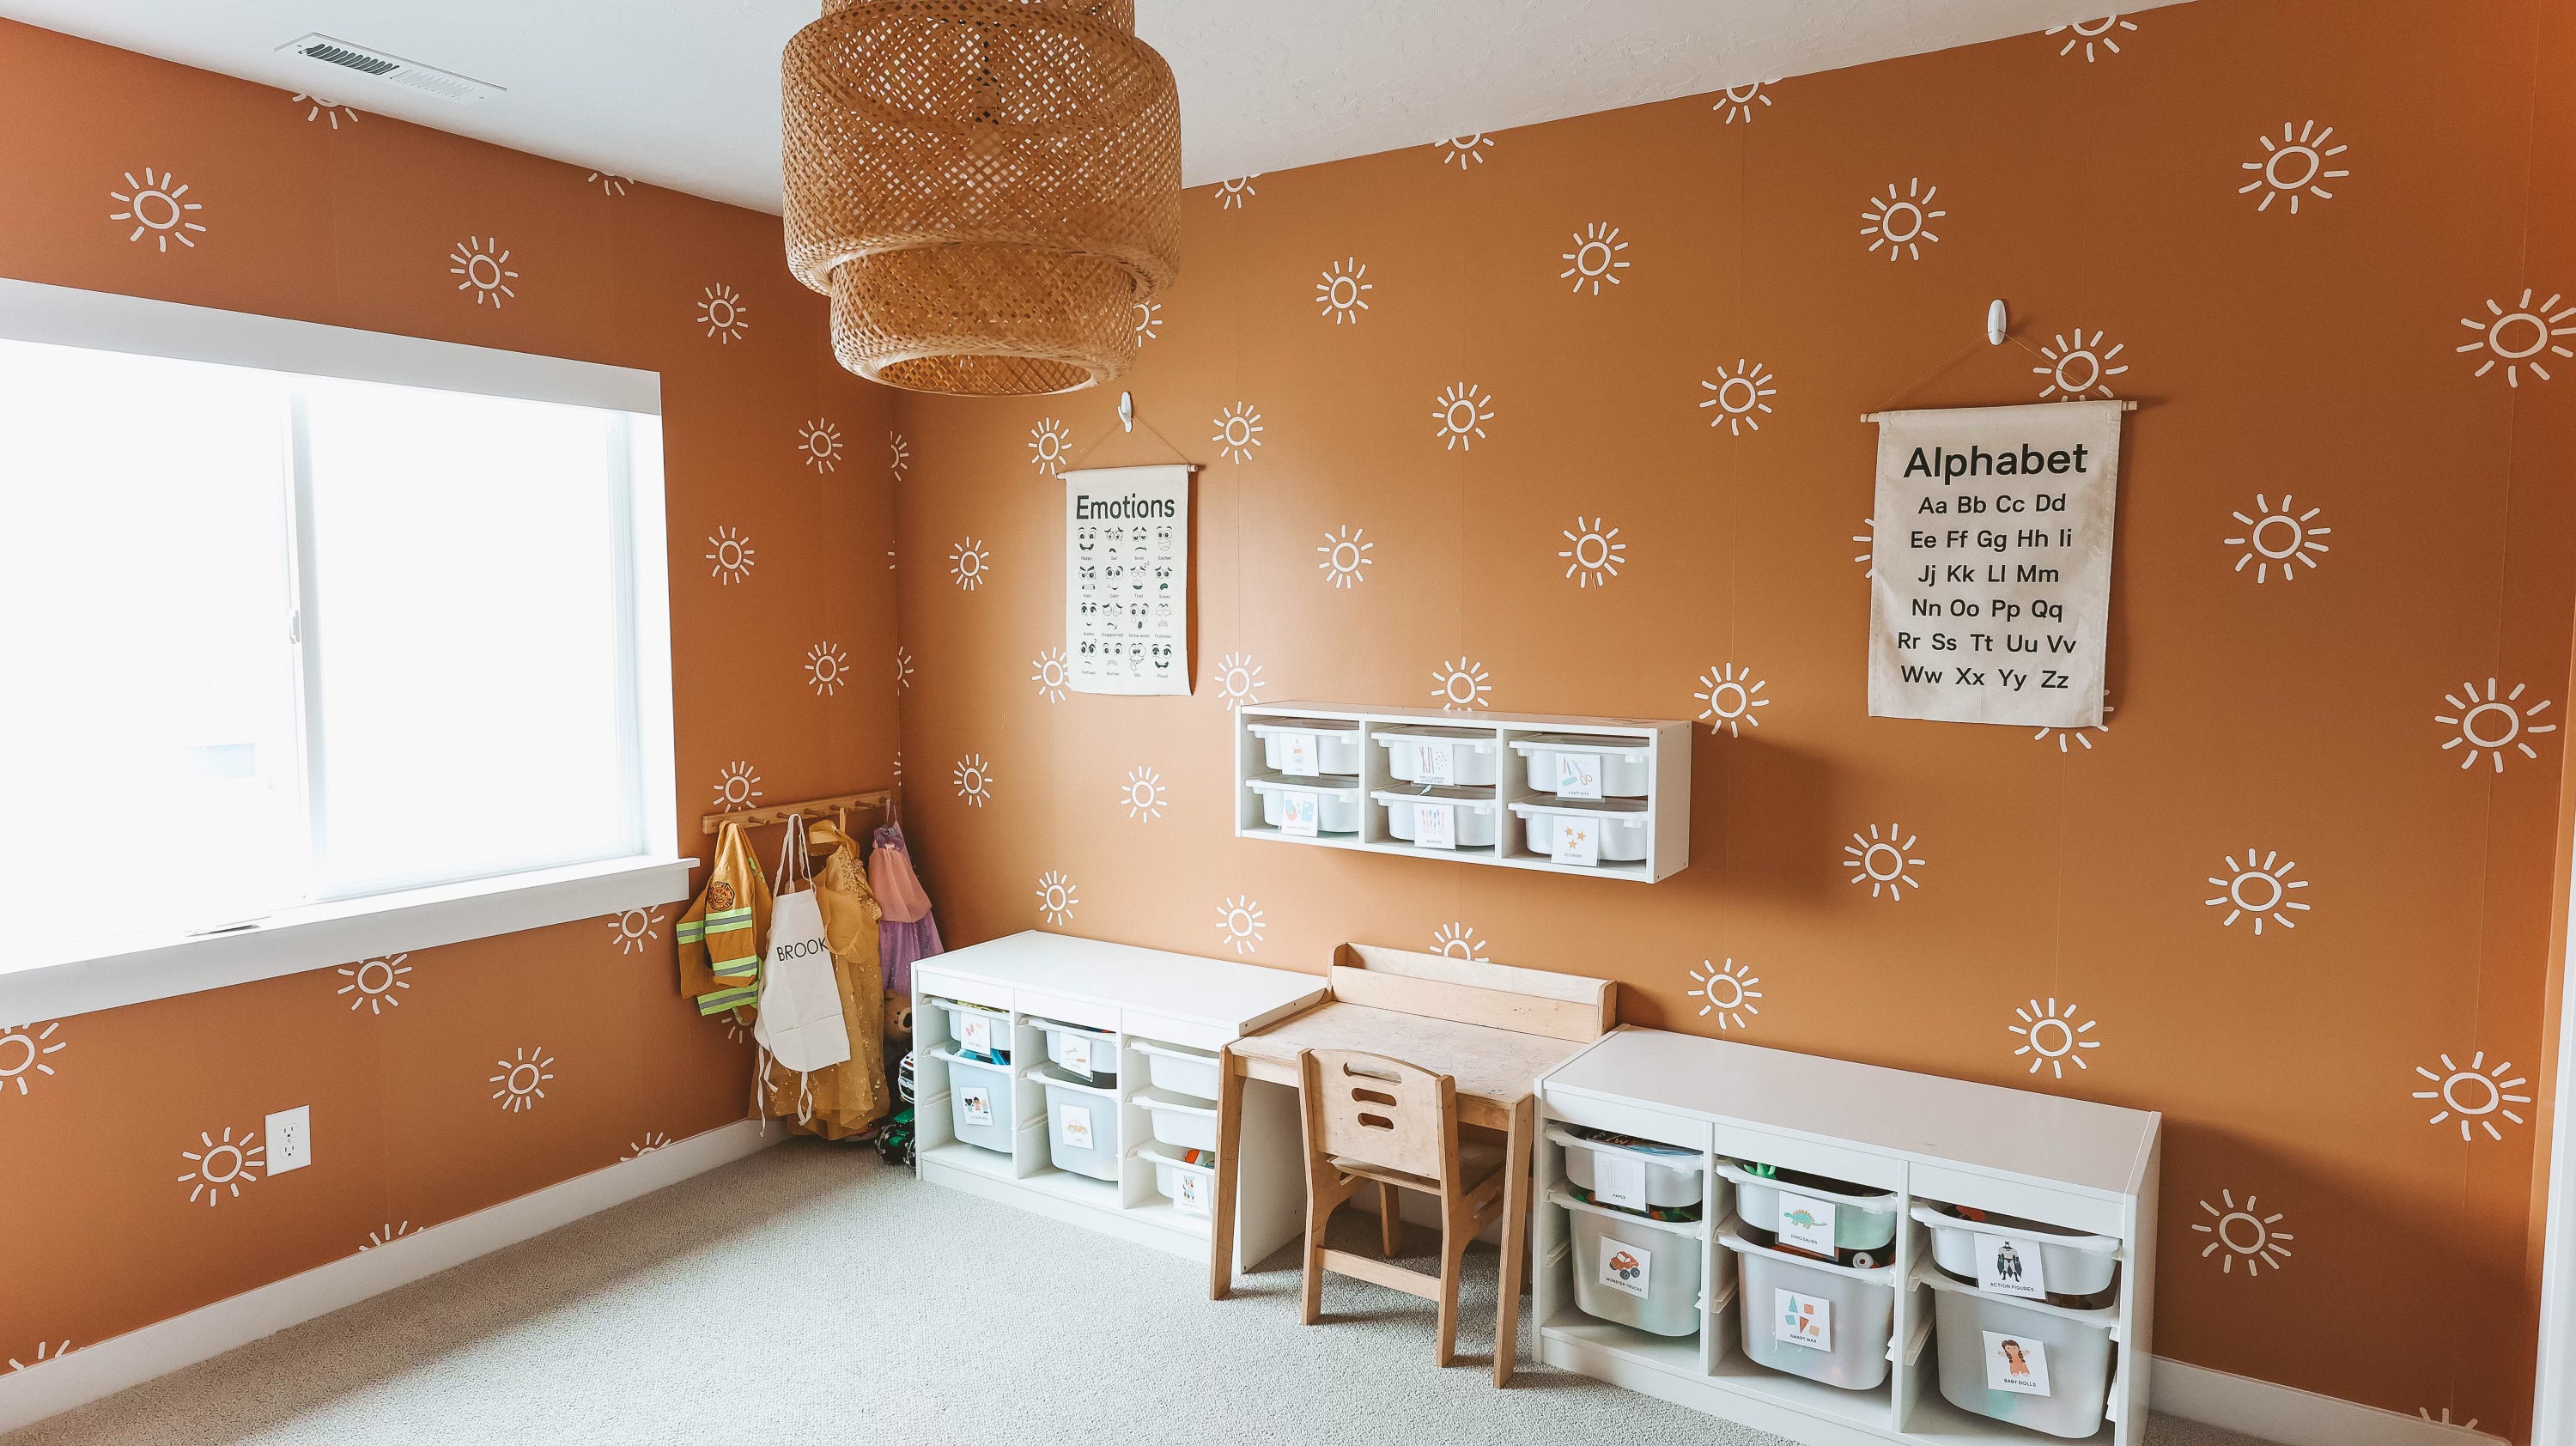 Bright and educational playroom featuring terracotta walls with white sunburst decals, wooden furniture, and storage units